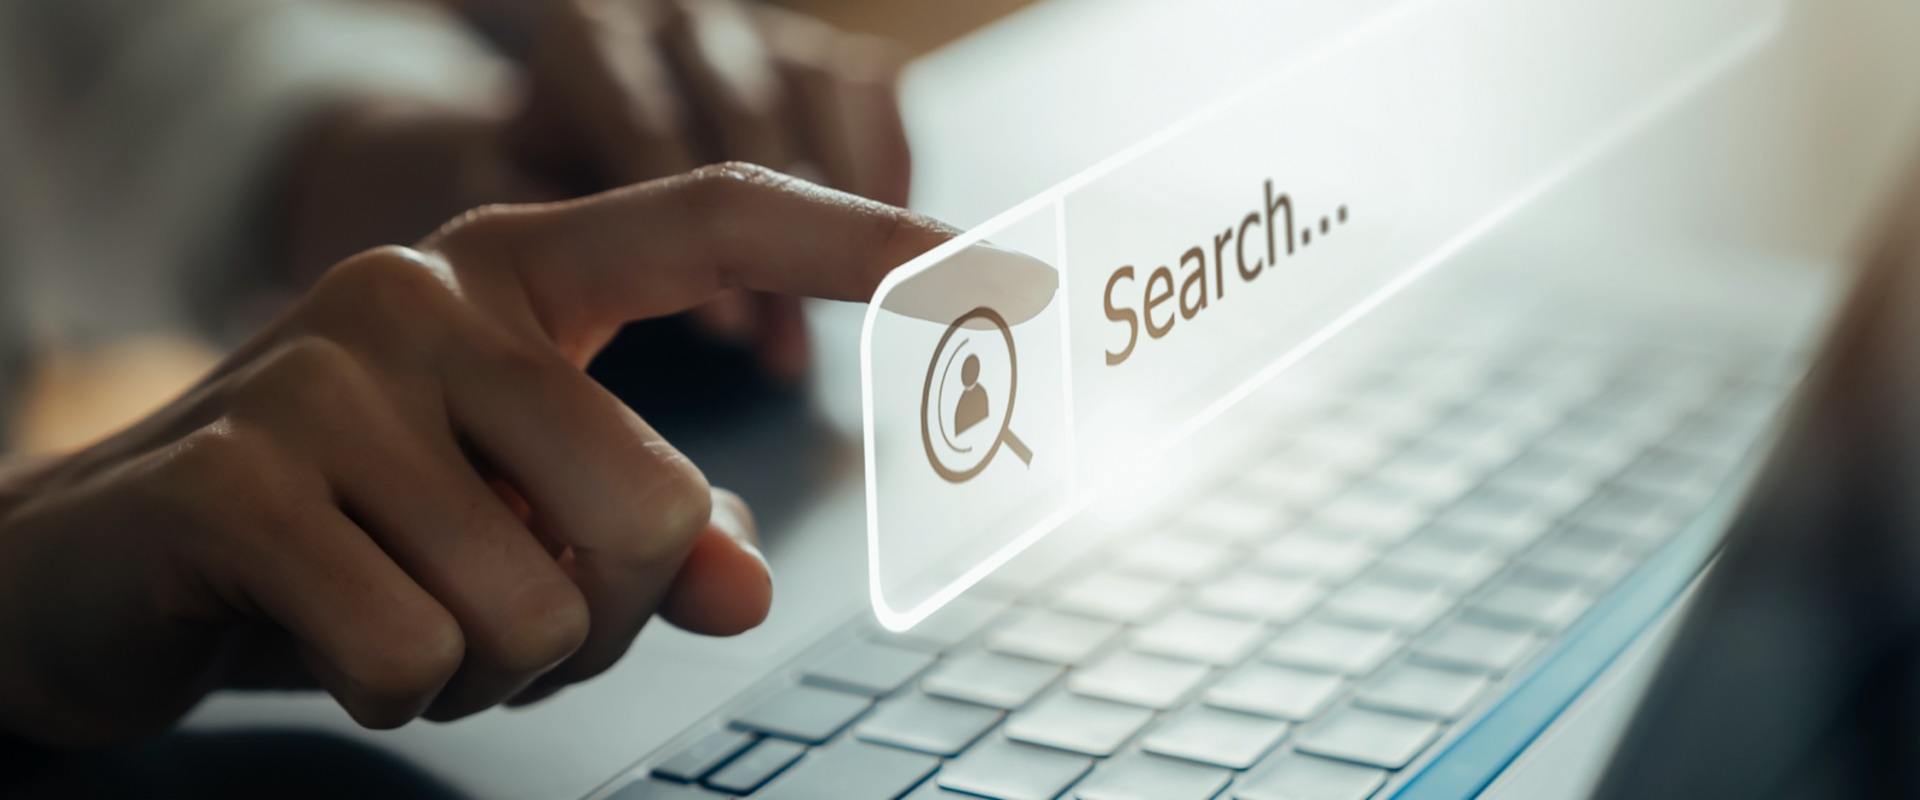 Why is local search marketing important?